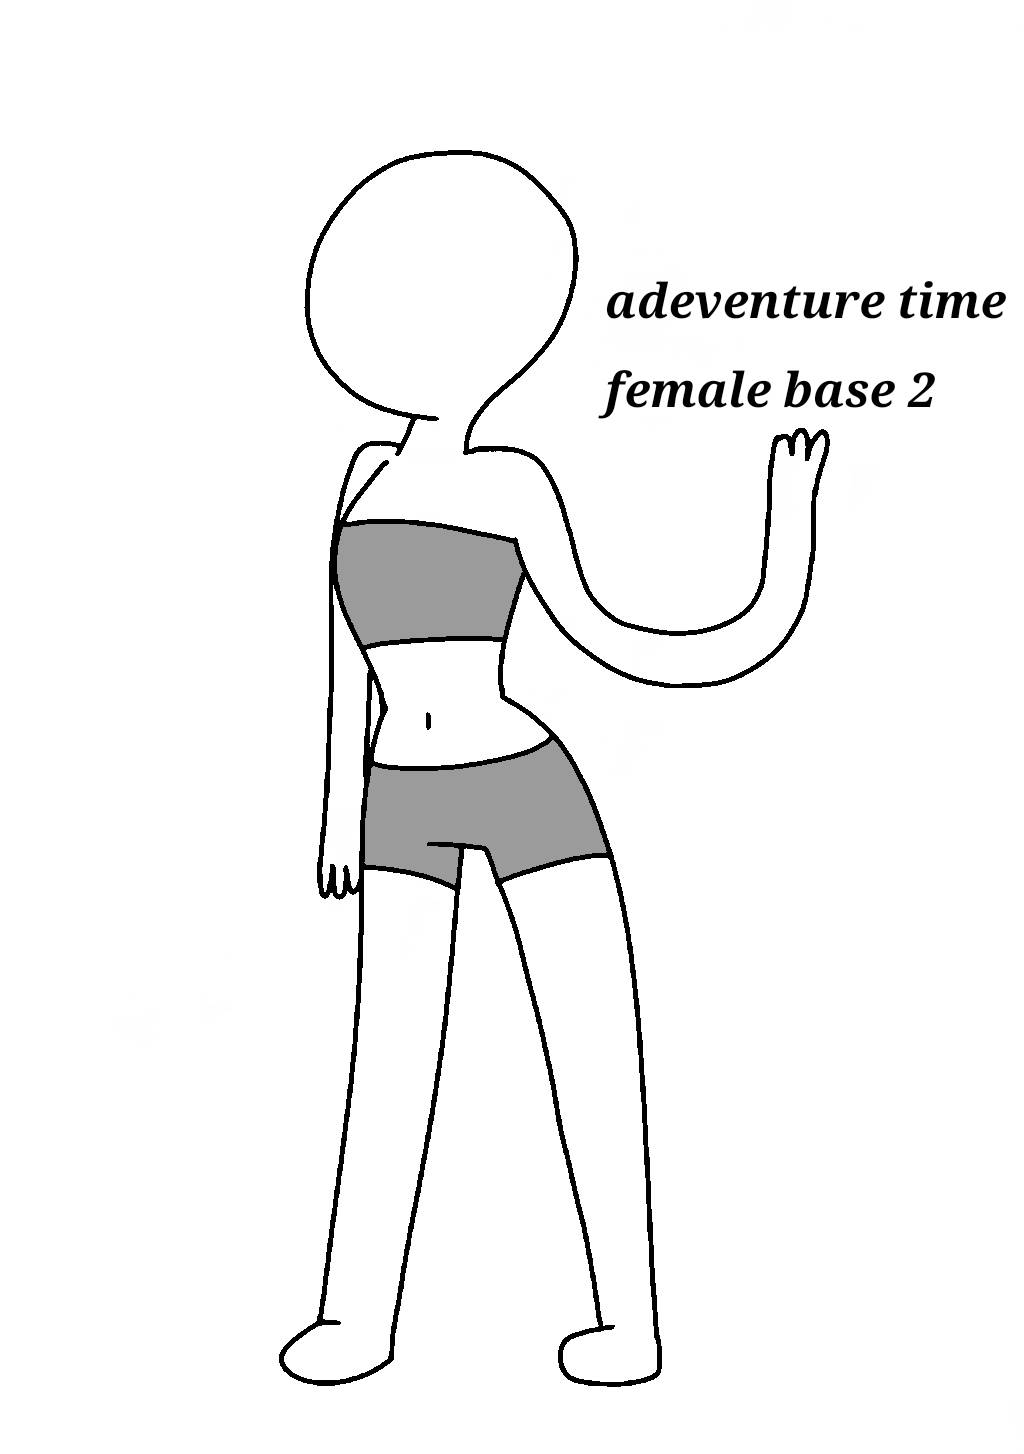 Adventure Time Female Base 2 By Adriana4ever On Deviantart